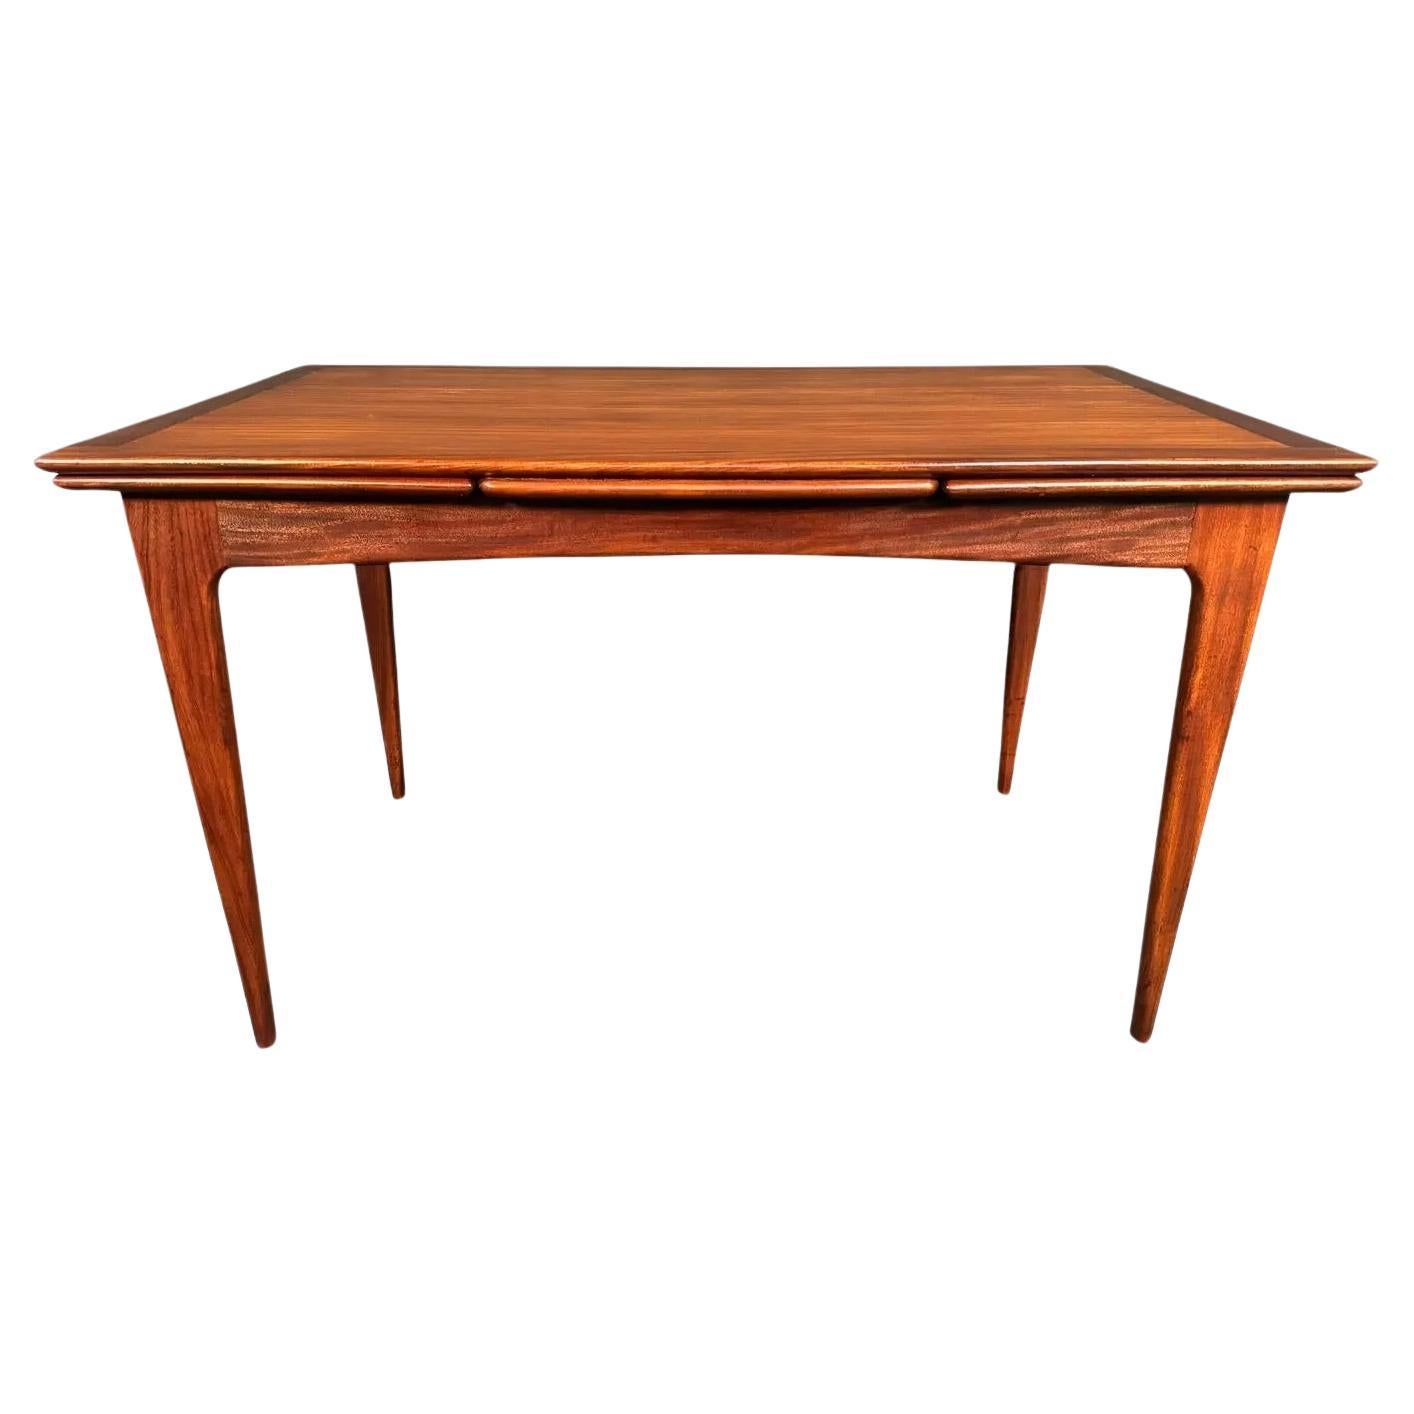 Vintage British Mid Century Modern Afromasia Teak Dining Table by A. Younger Ltd